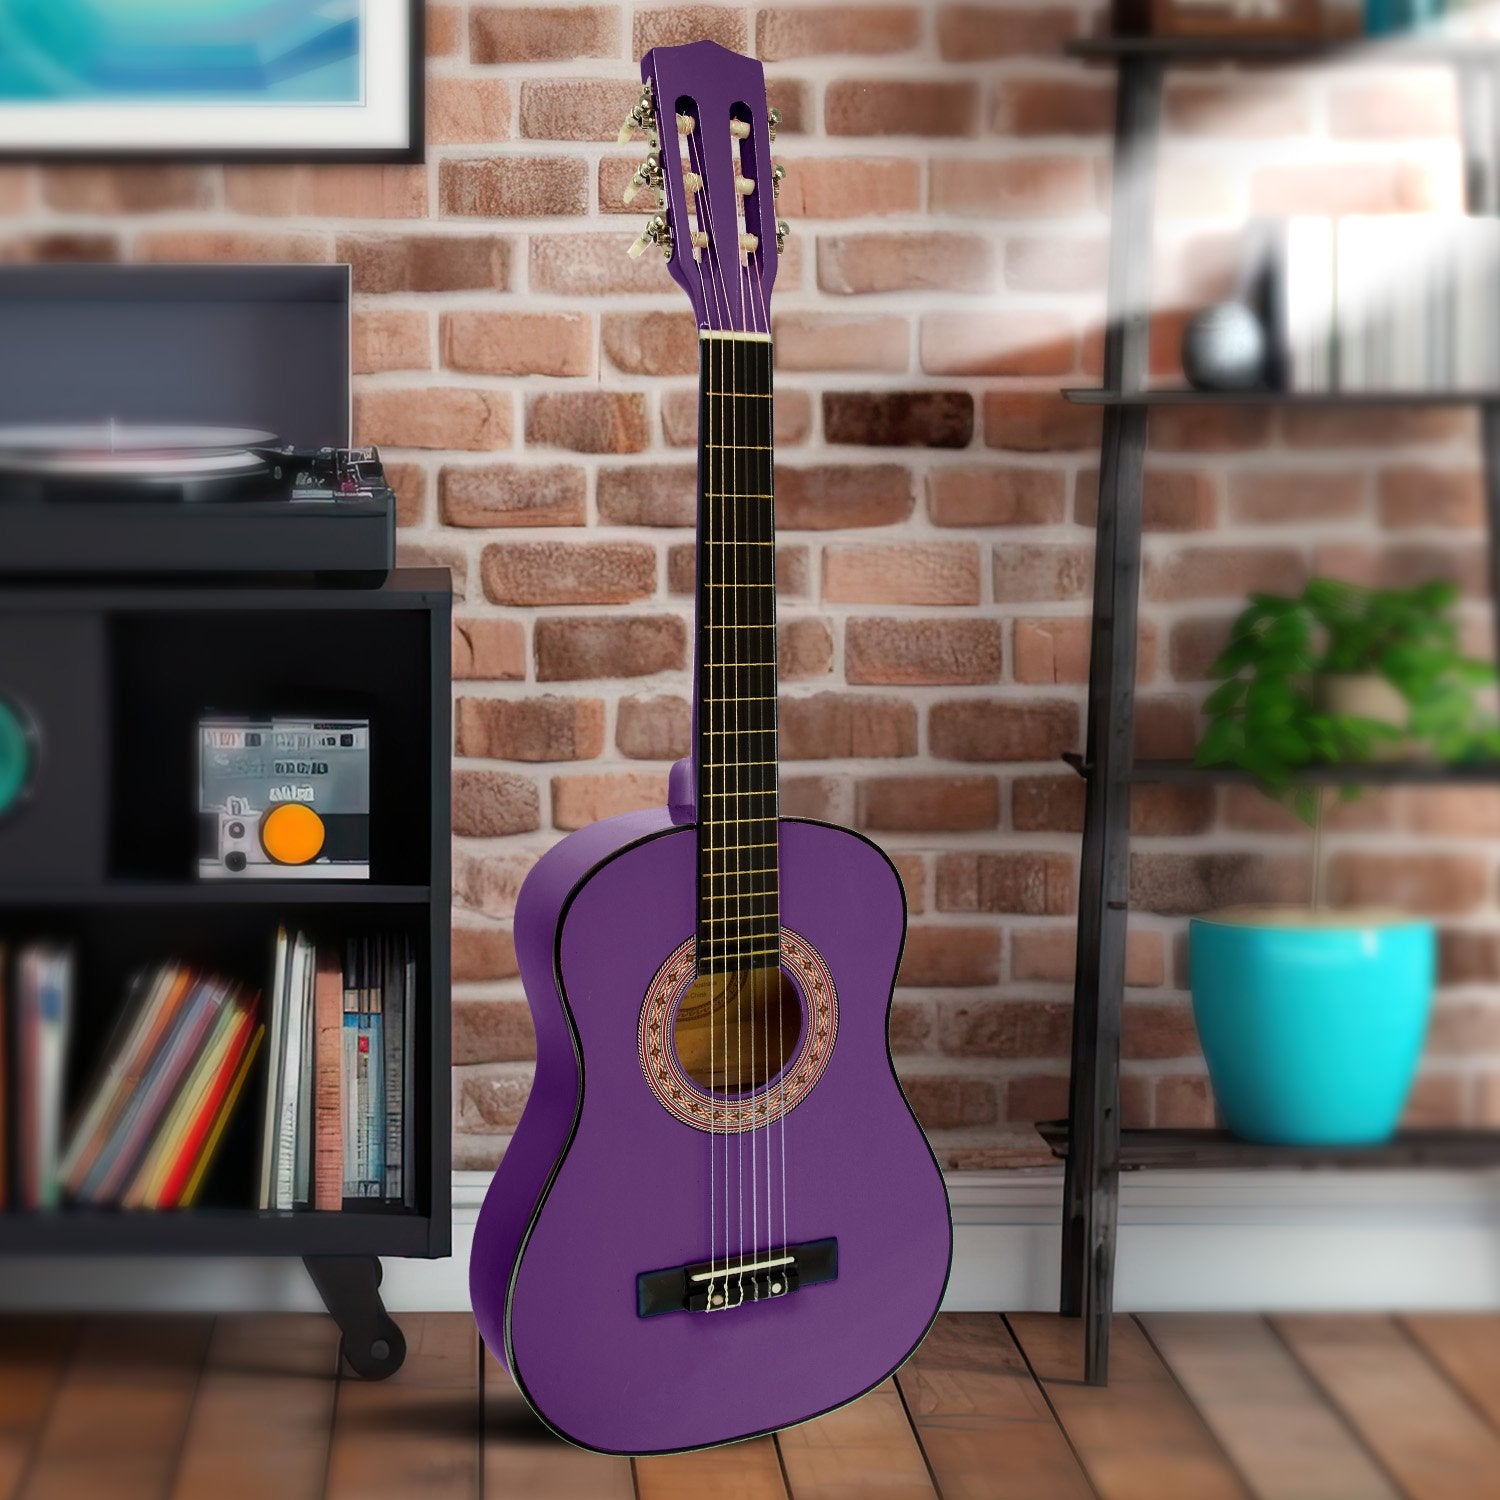 34in Acoustic Wooden Guitar for Kids with Bag - Karrera